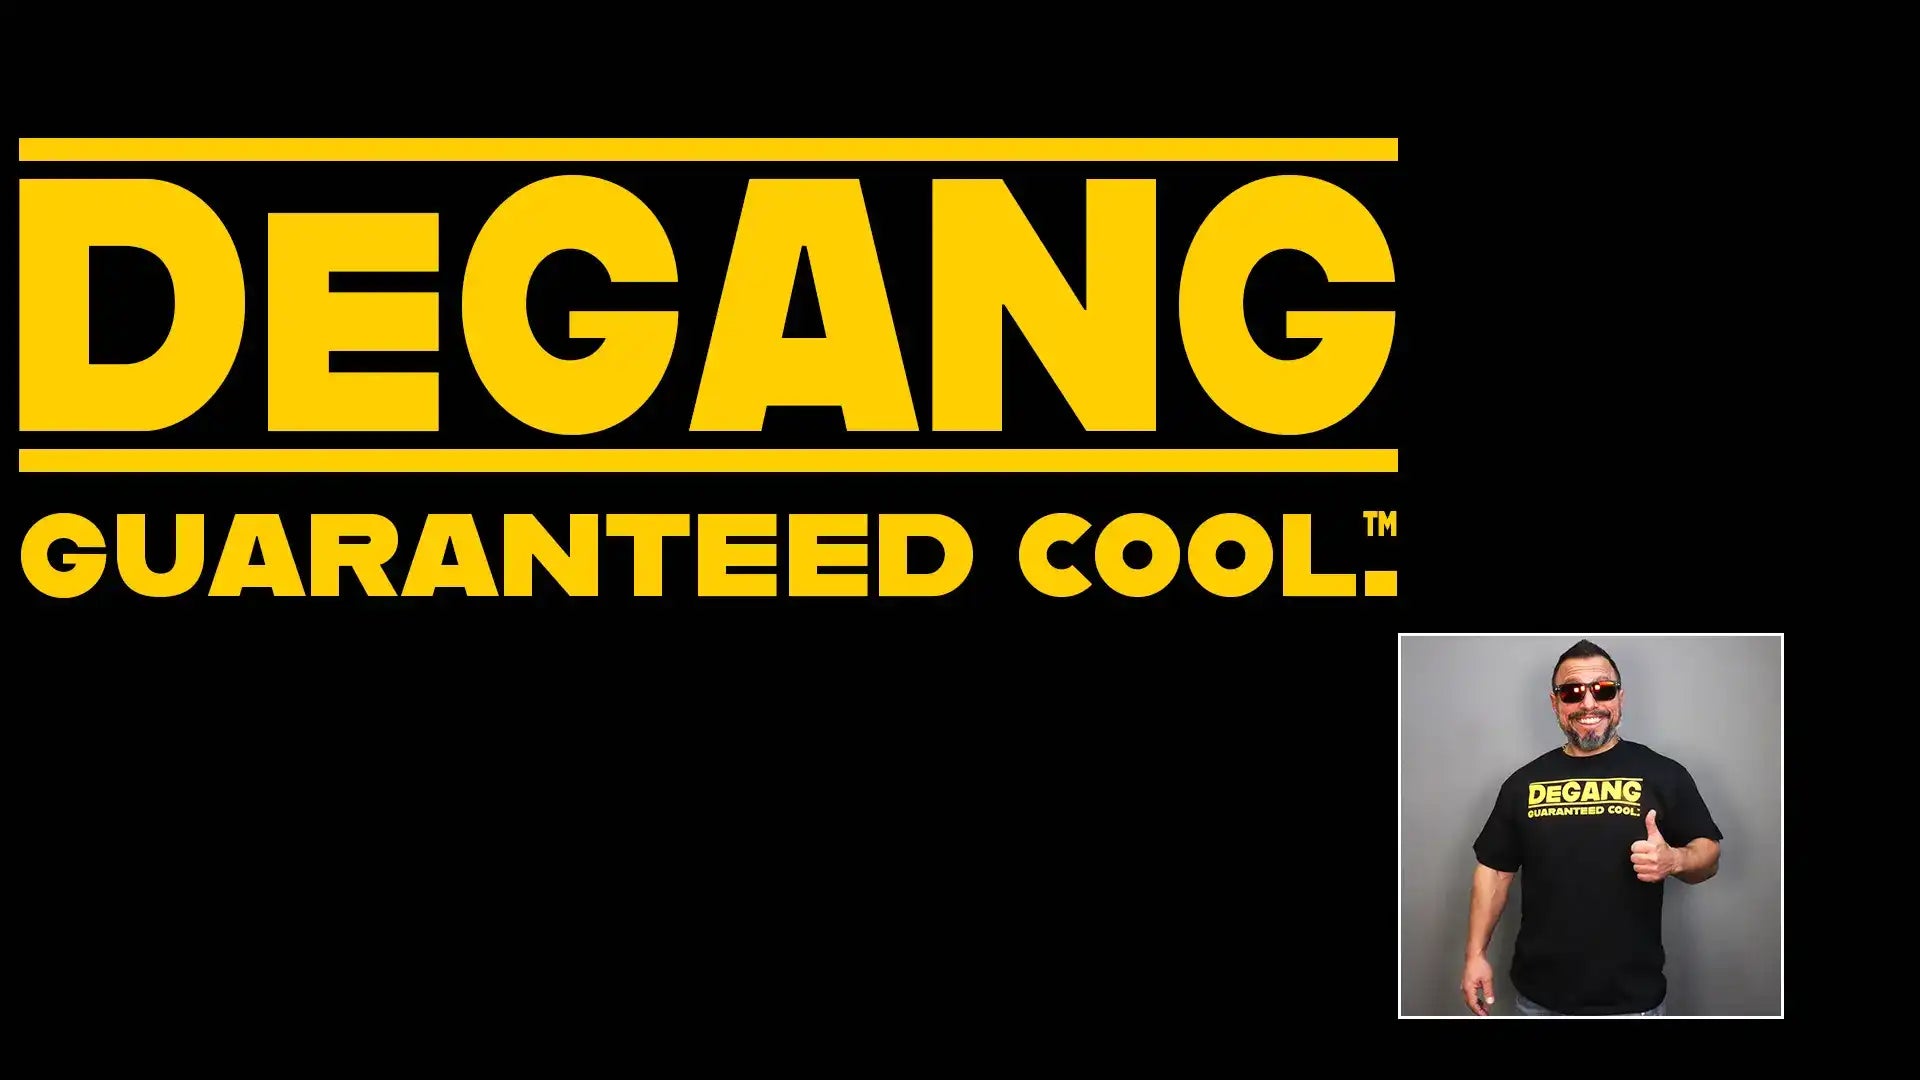 Yellow DeGANG guaranteed cool logo on black background Vince in lower right corner wears black shirt with logo